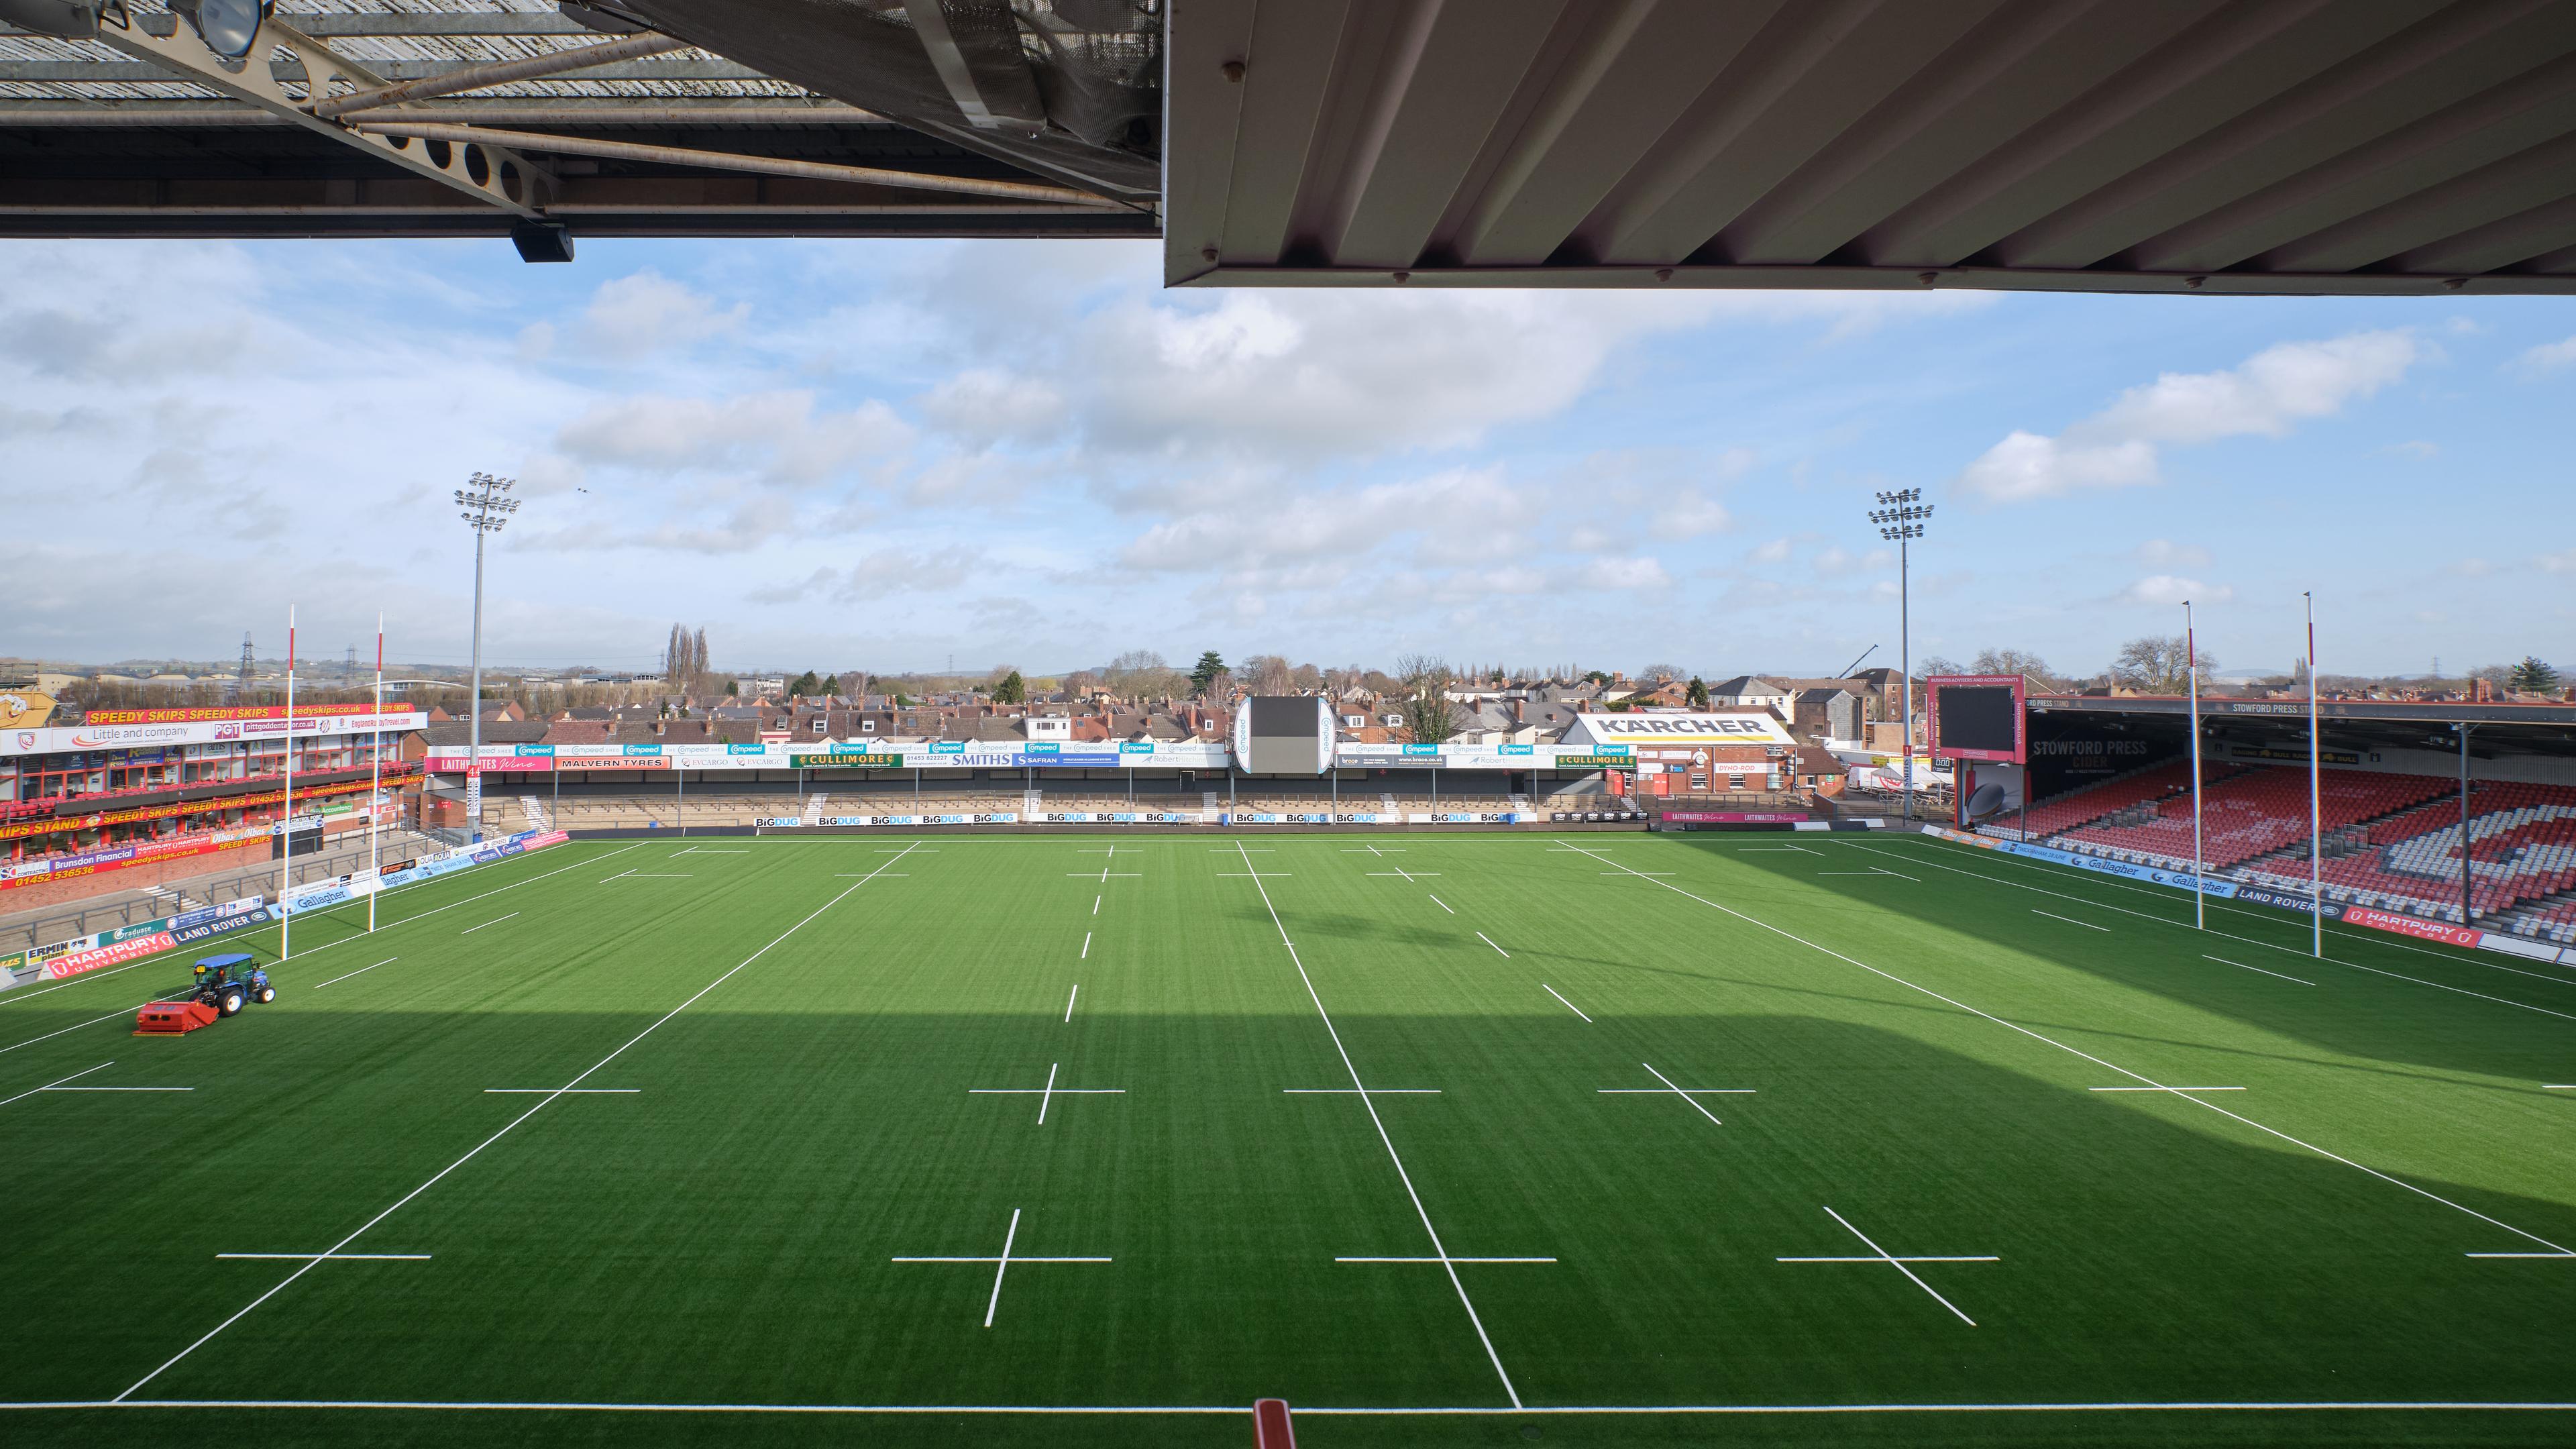 Gloucester Rugby Club: Kingsholm Stadium, The Heritage photo #14